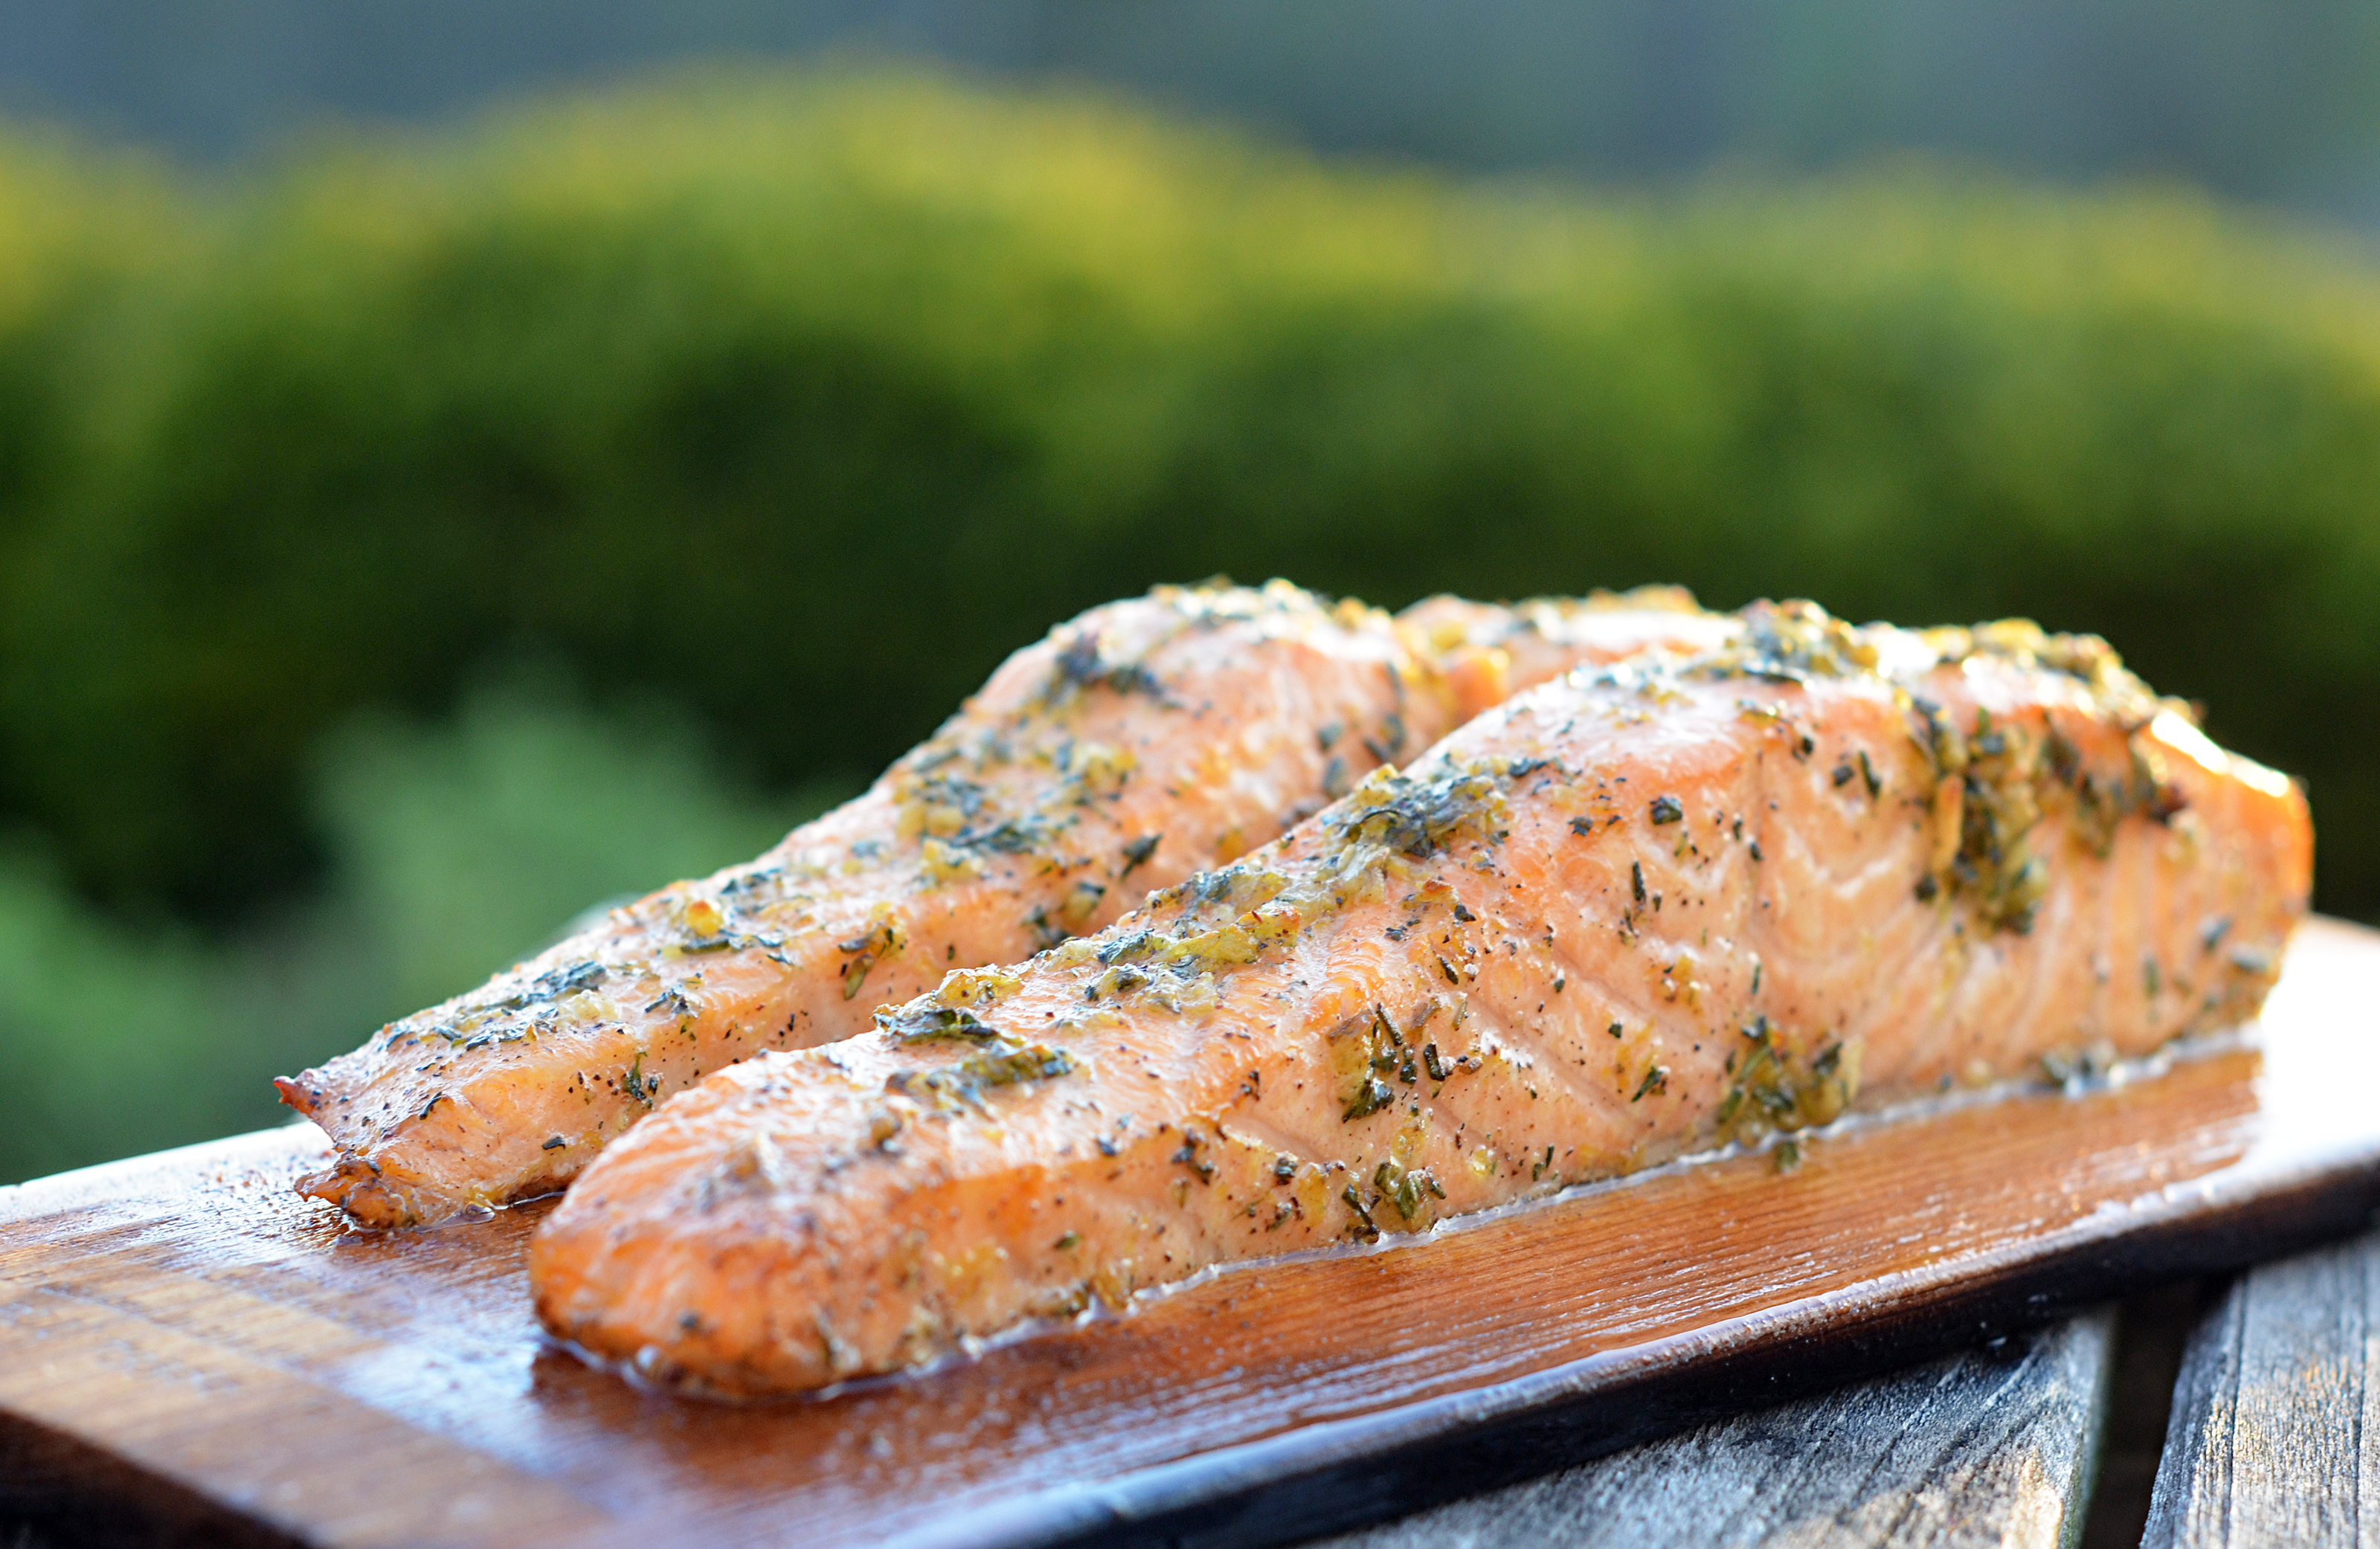 Cedar Planked Salmon With Lemon Garlic Herbs Once Upon A Chef,How To Make A Strawberry Mojito